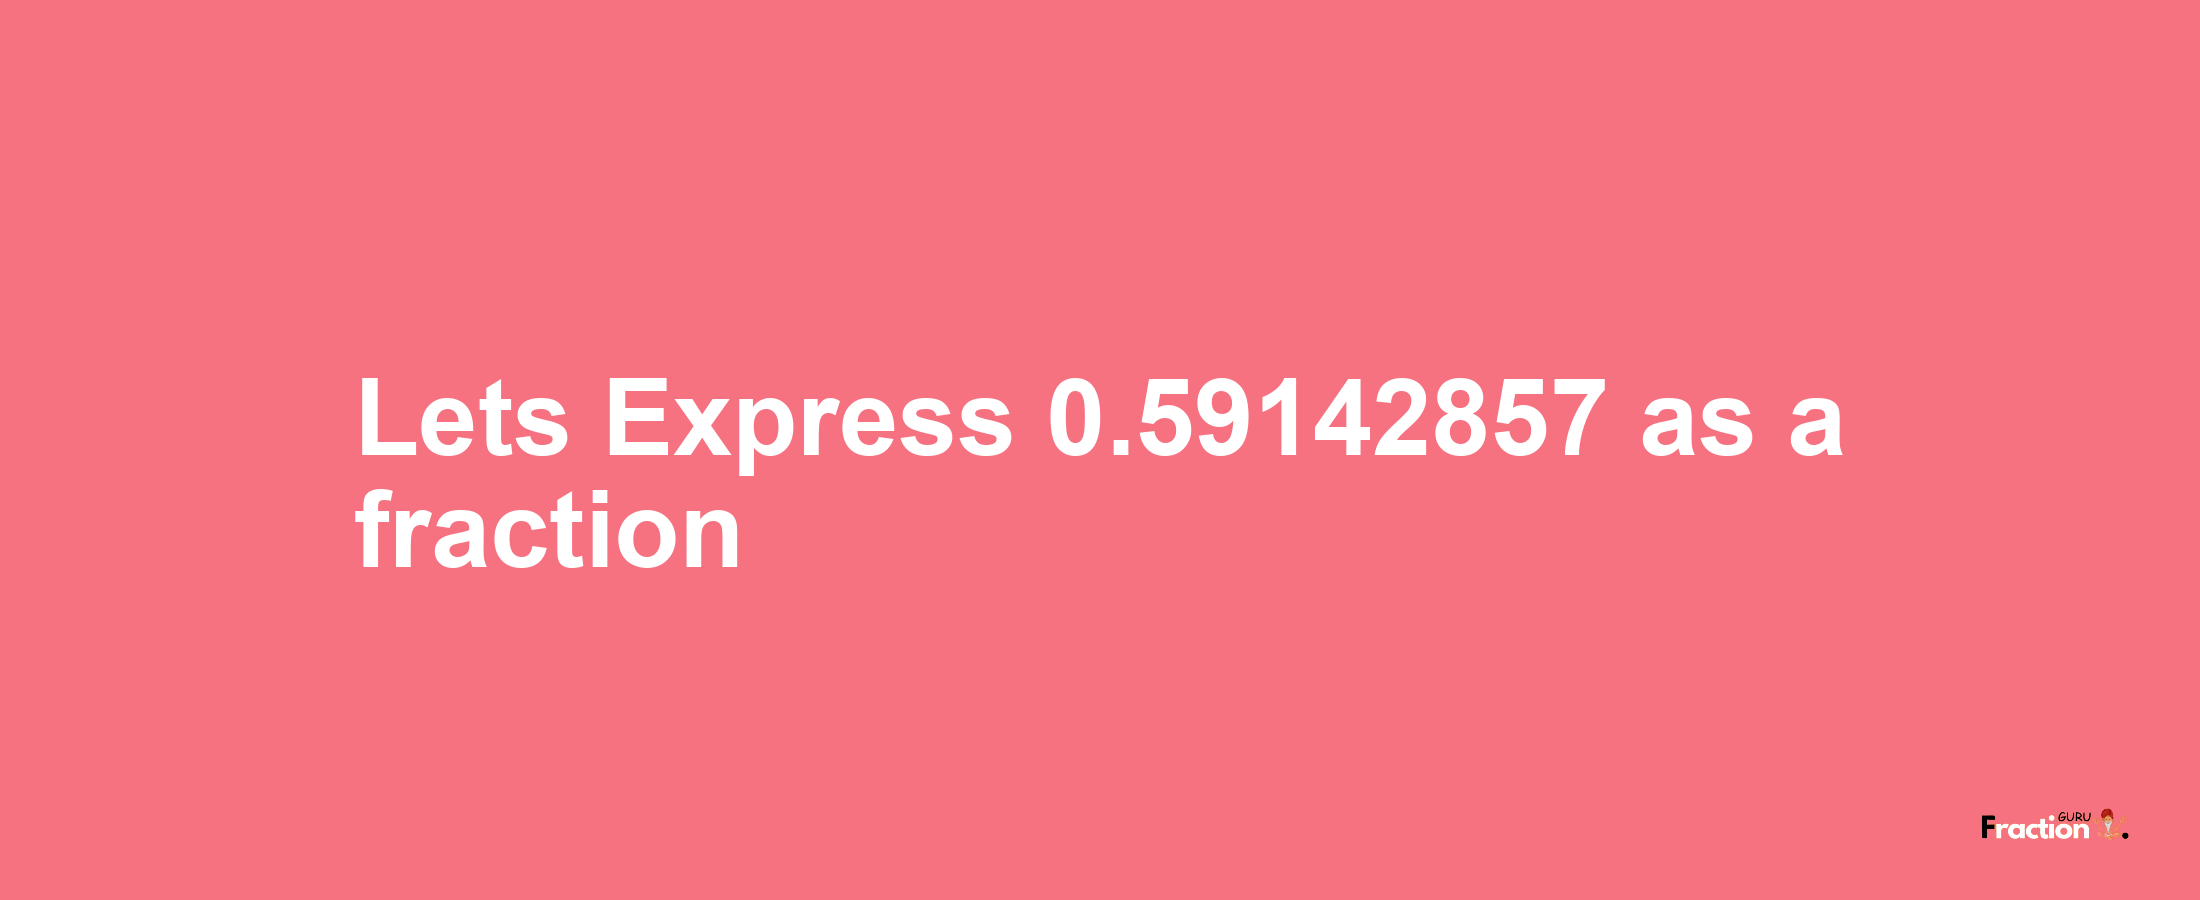 Lets Express 0.59142857 as afraction